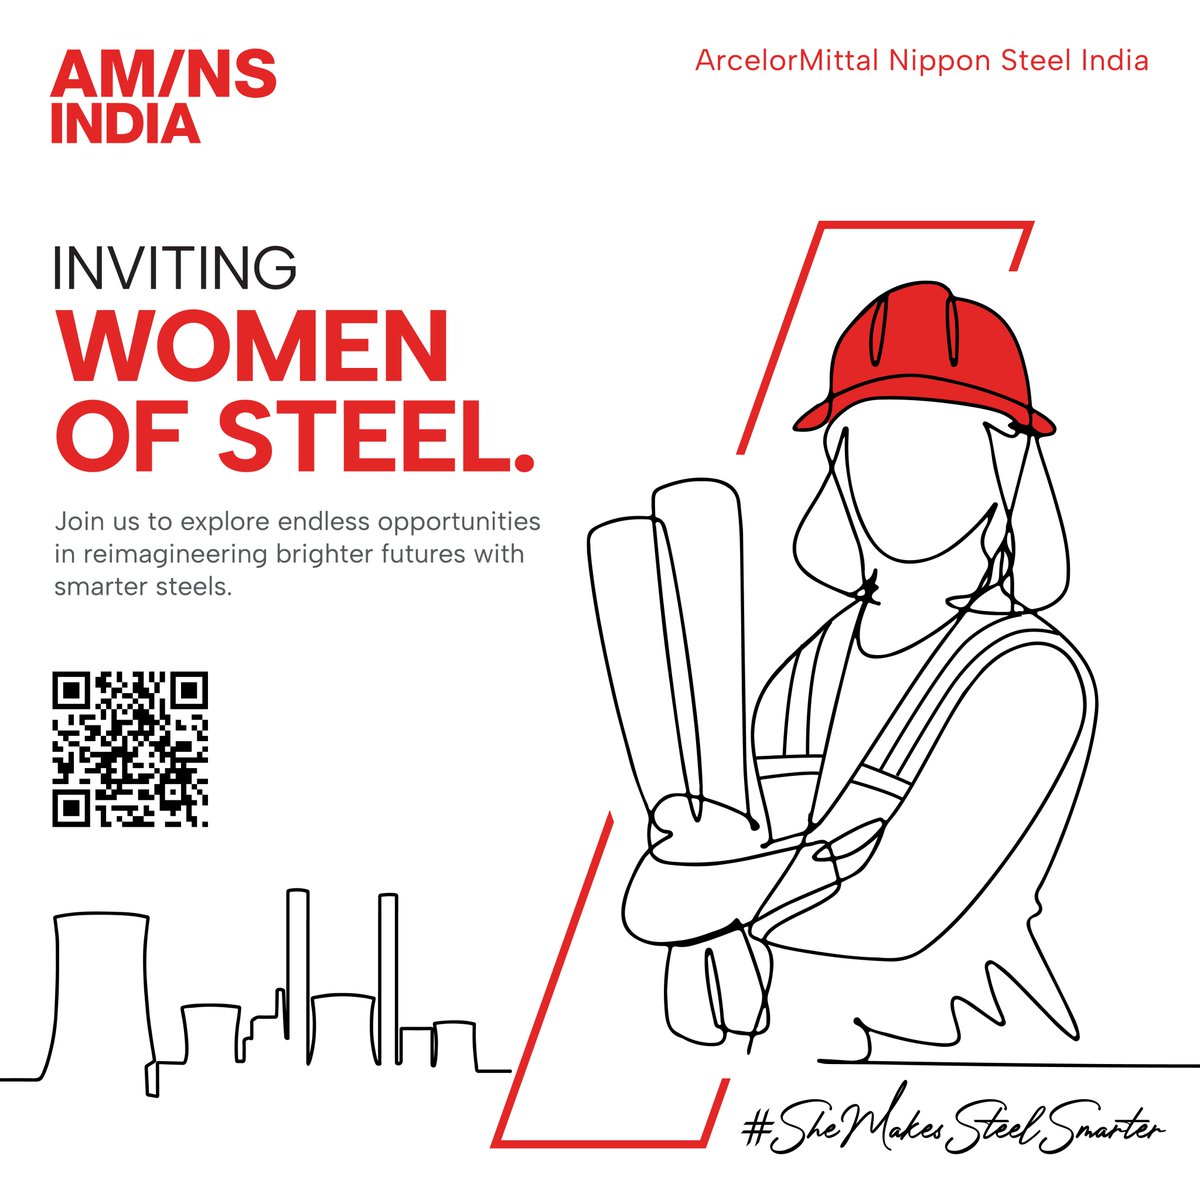 Calling all women with steel in their veins!
We're hiring female engineering graduates (BE/BTech - 2021/22/23) in Mech/Electrical/Ceramic/Civil.
Join AM/NS India & revolutionise the steel industry:
tinyurl.com/2fdkalq9

#SmarterSteels #SmarterSteelsBrighterFutures